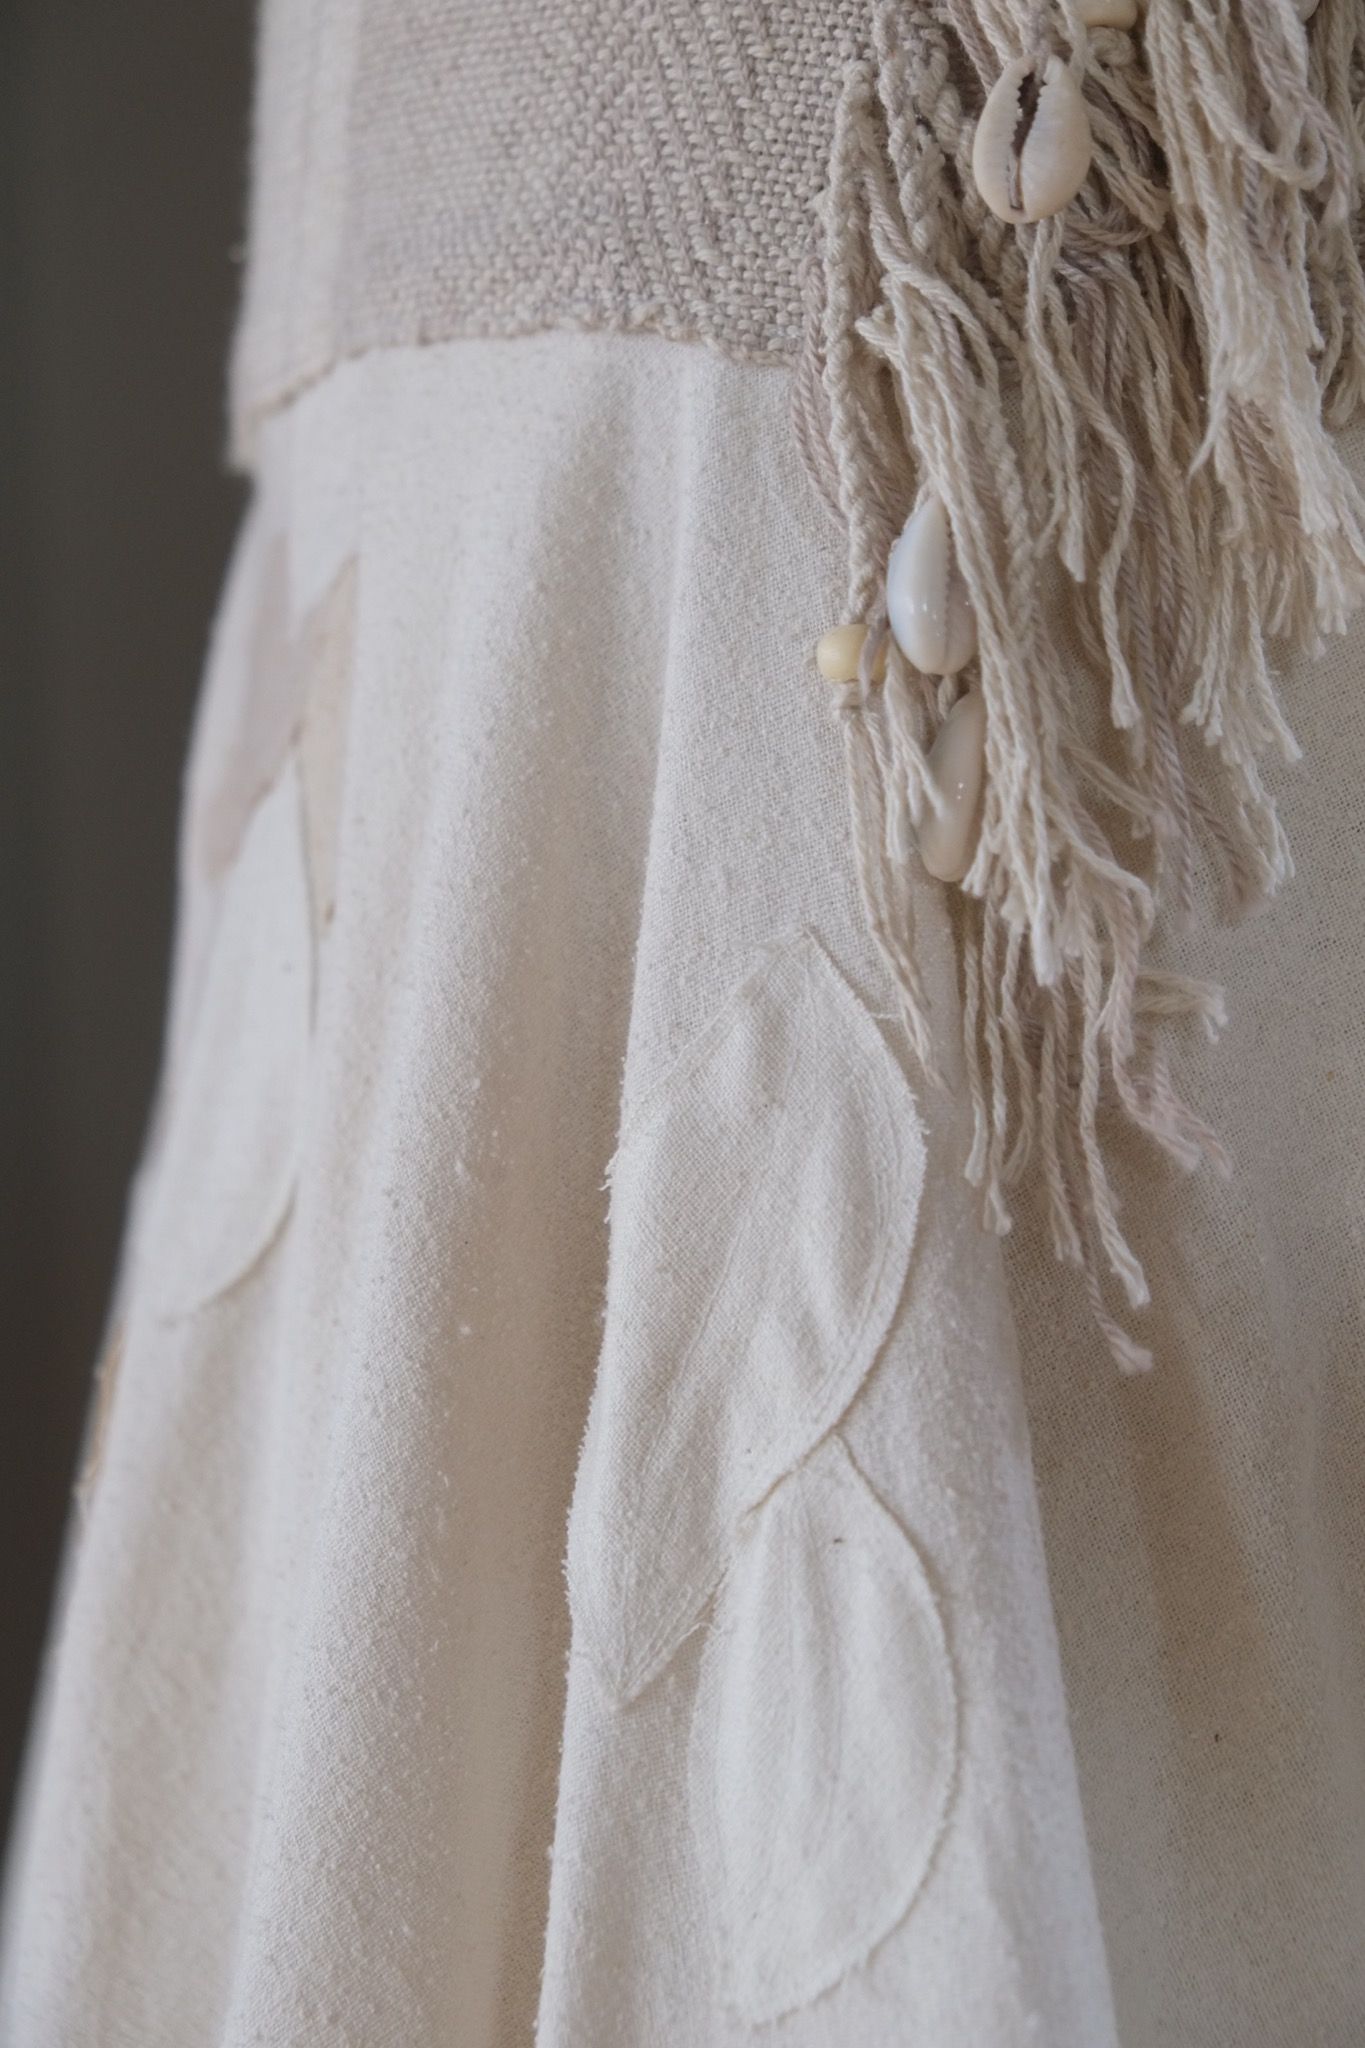 detail of a white handmade wedding skirt with handwoven waistband, fringe and leaf applique